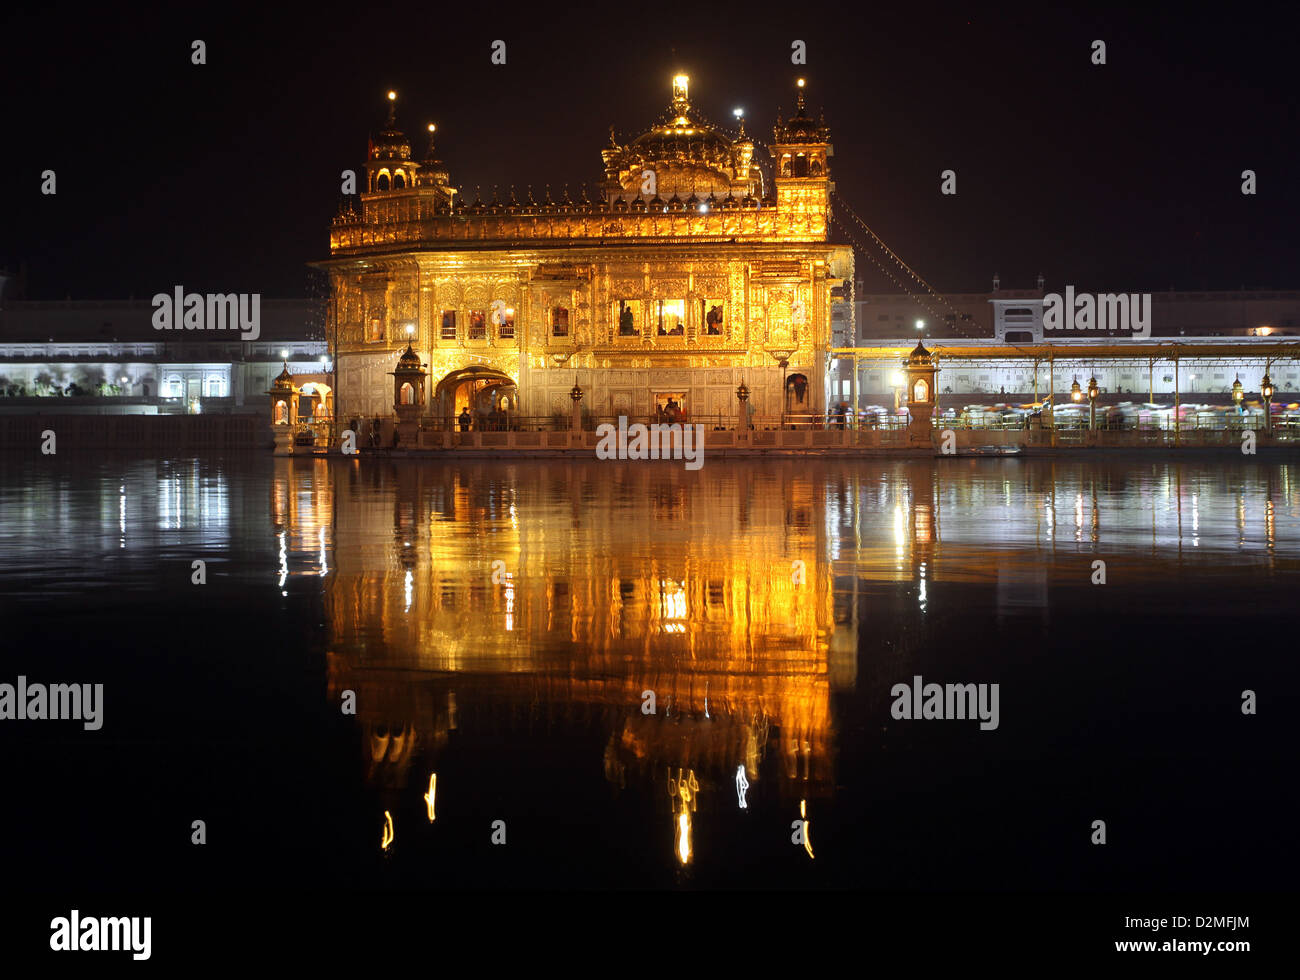 General view of the The Harmandir Sahib also Darbar Sahib, or Golden Temple pictured at night in Amritsar, Punjab, India Stock Photo